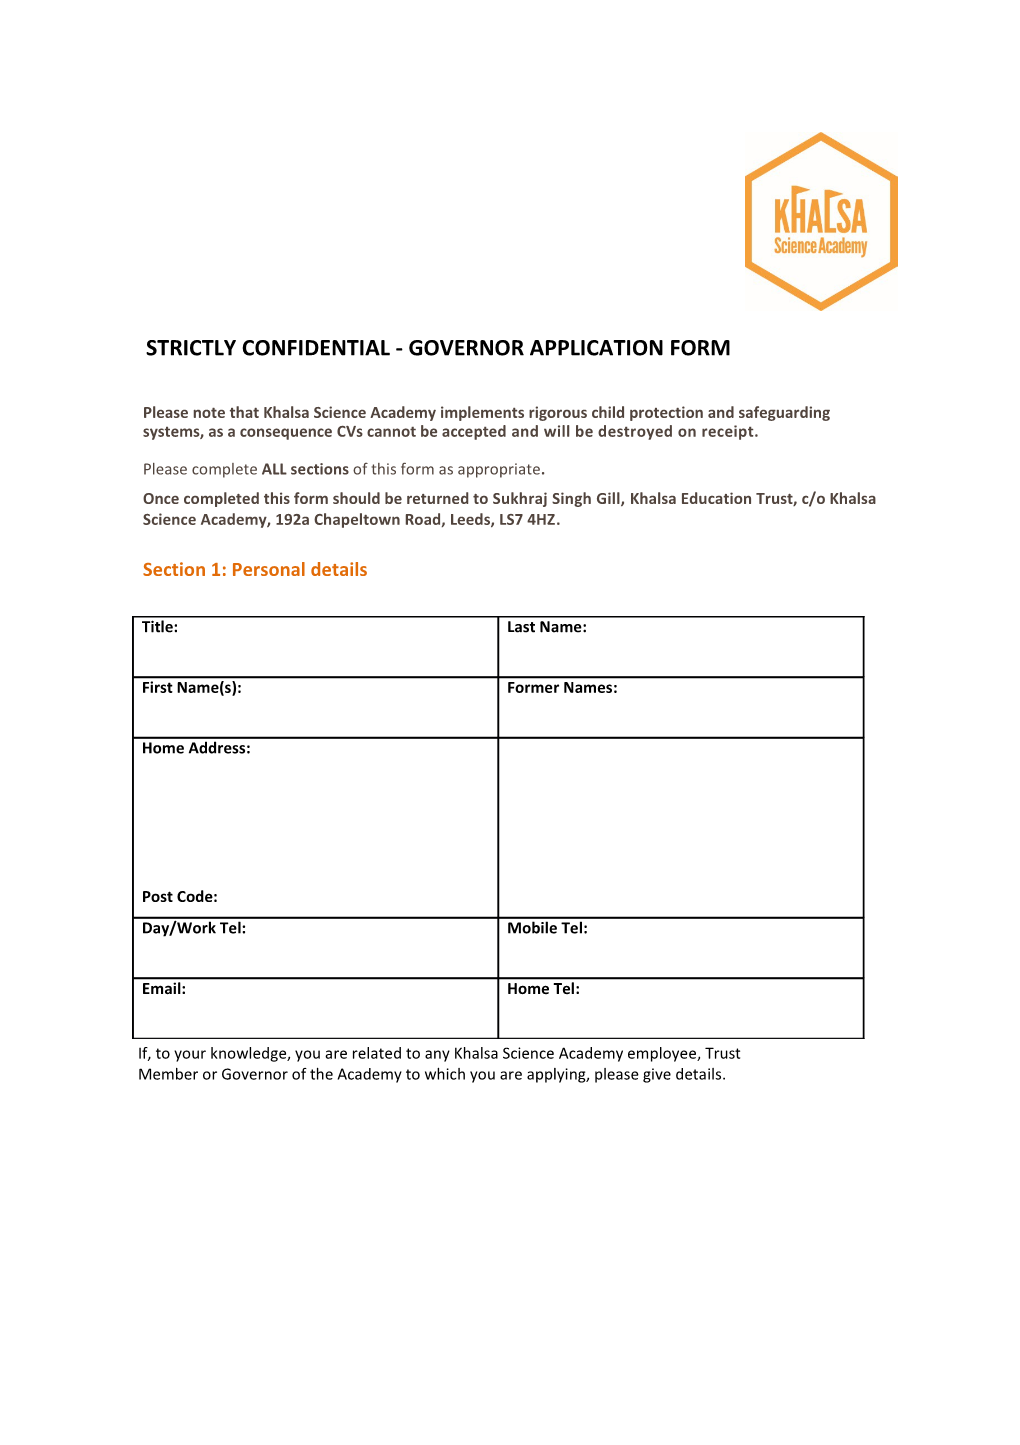 Strictly Confidential - Governor Application Form